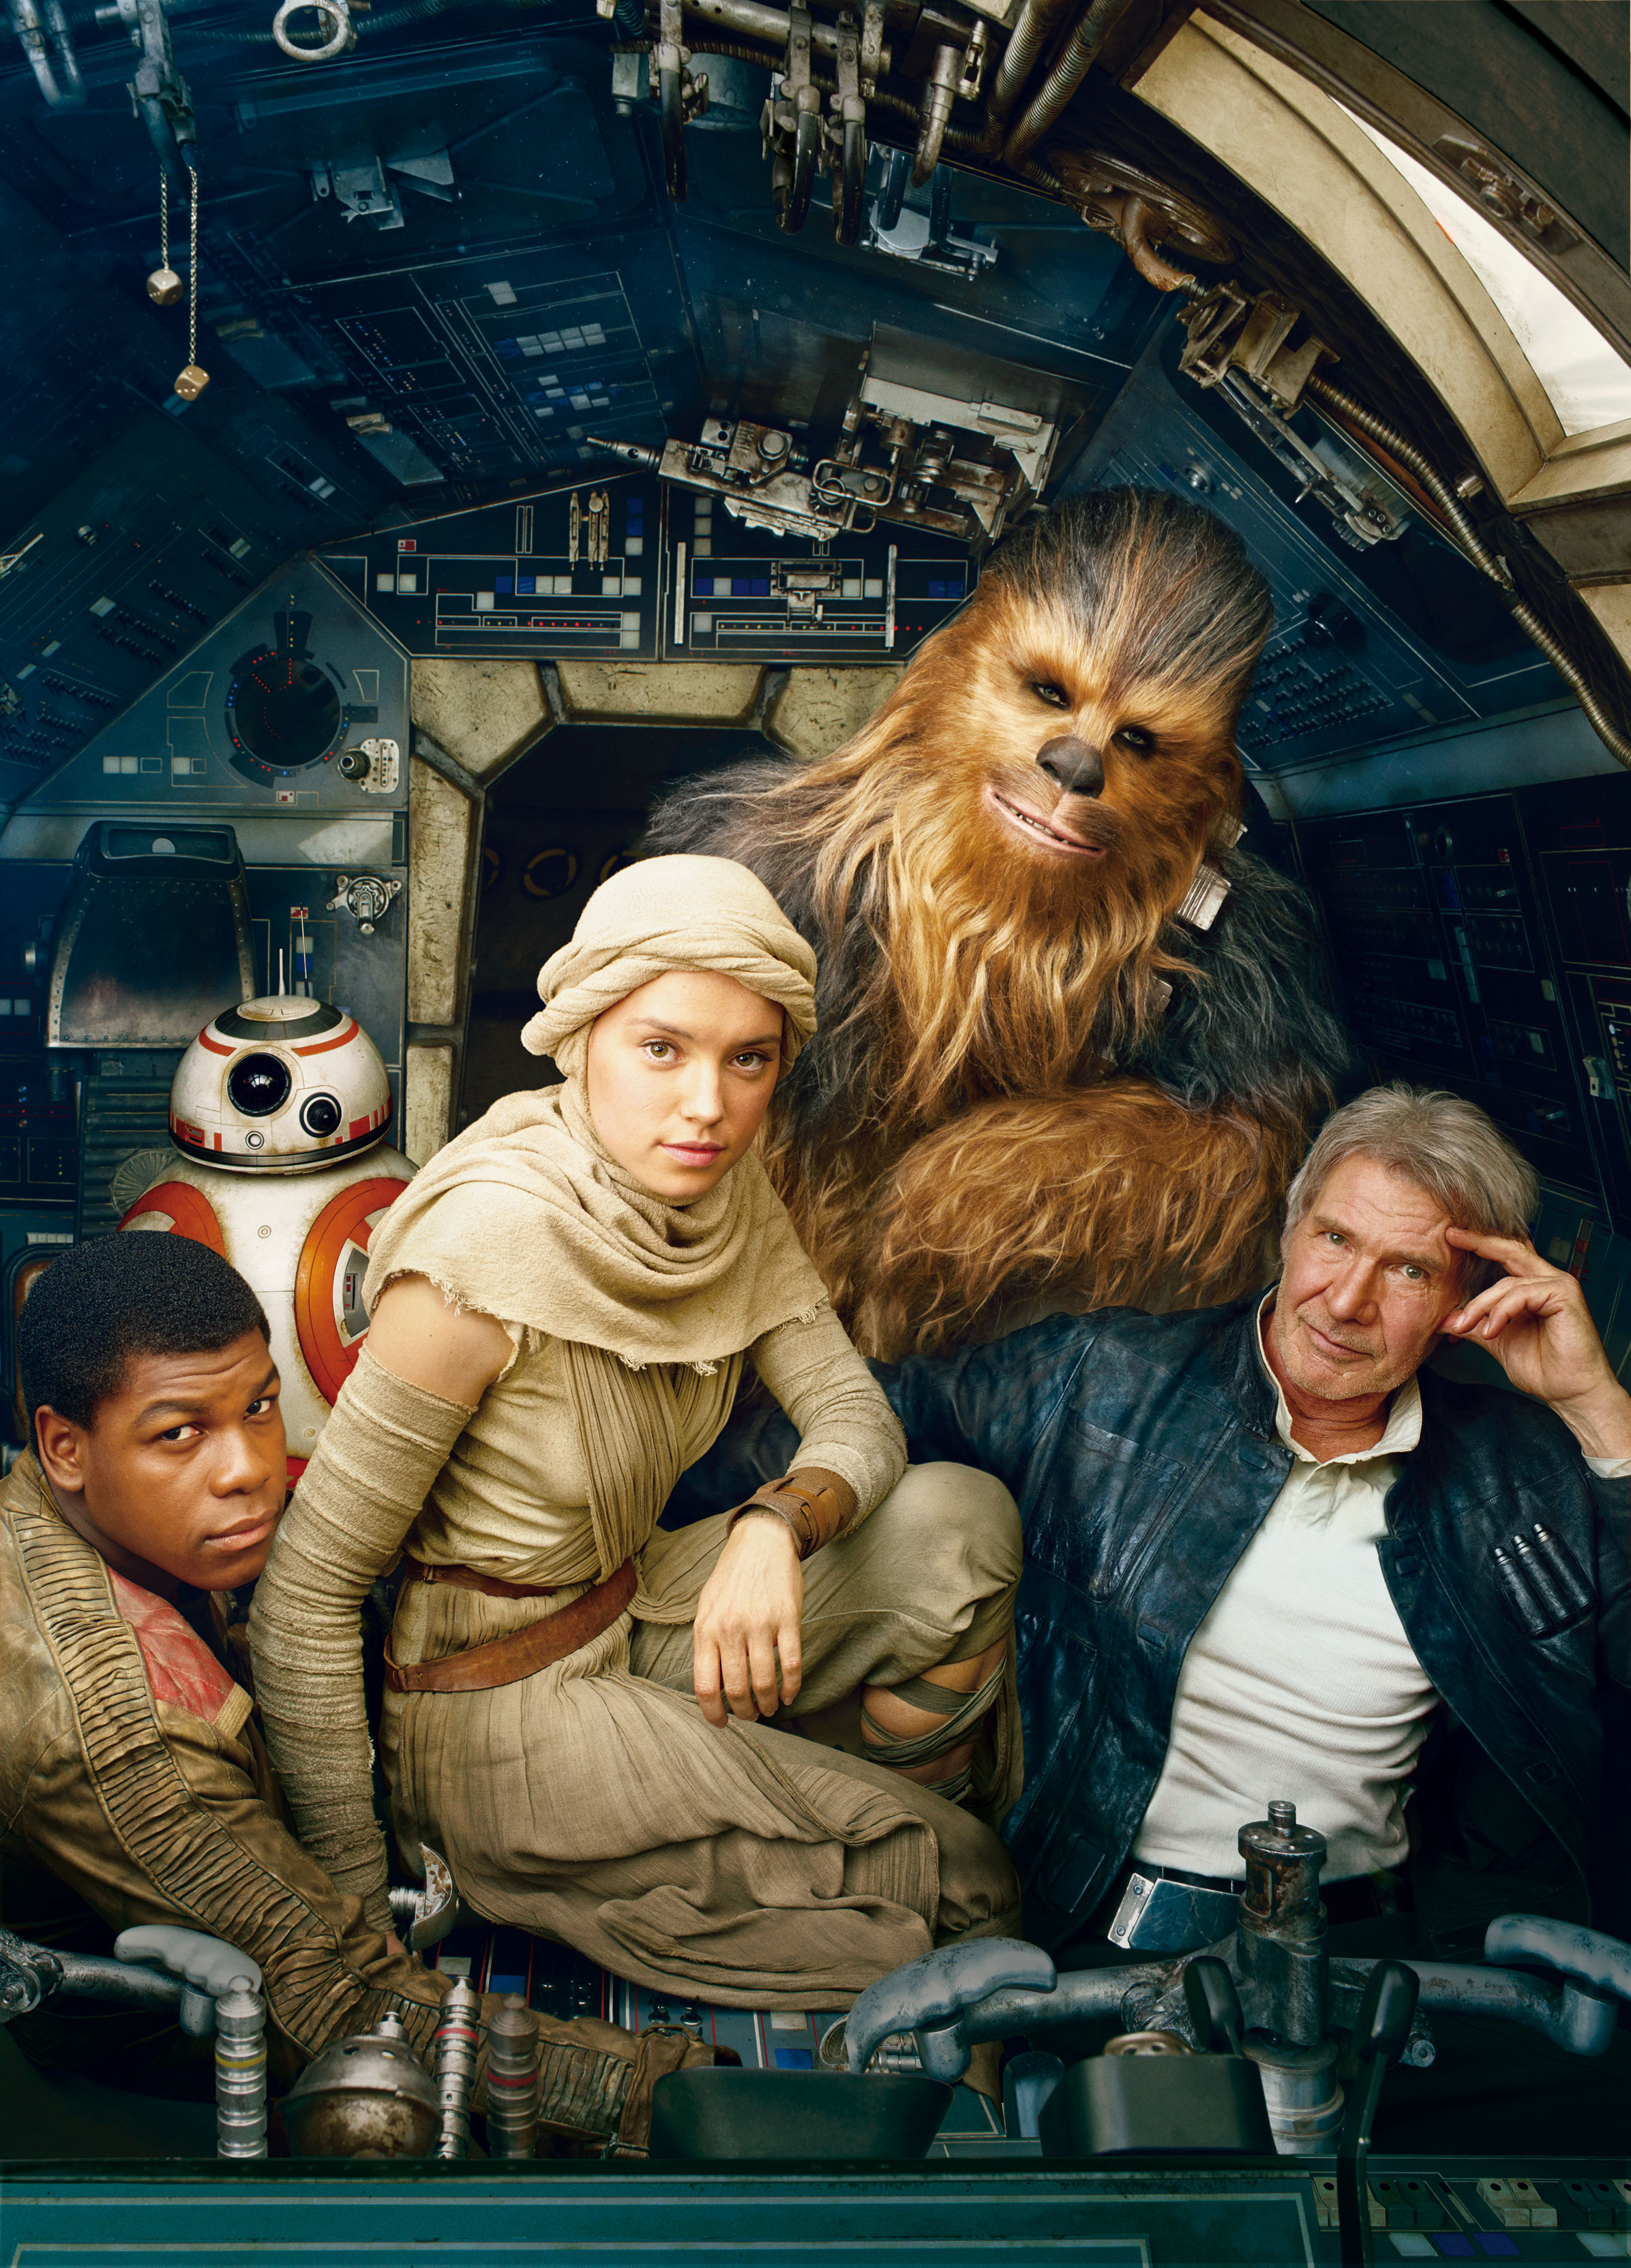 Star Wars Episode VII: The Force Awakens Picture